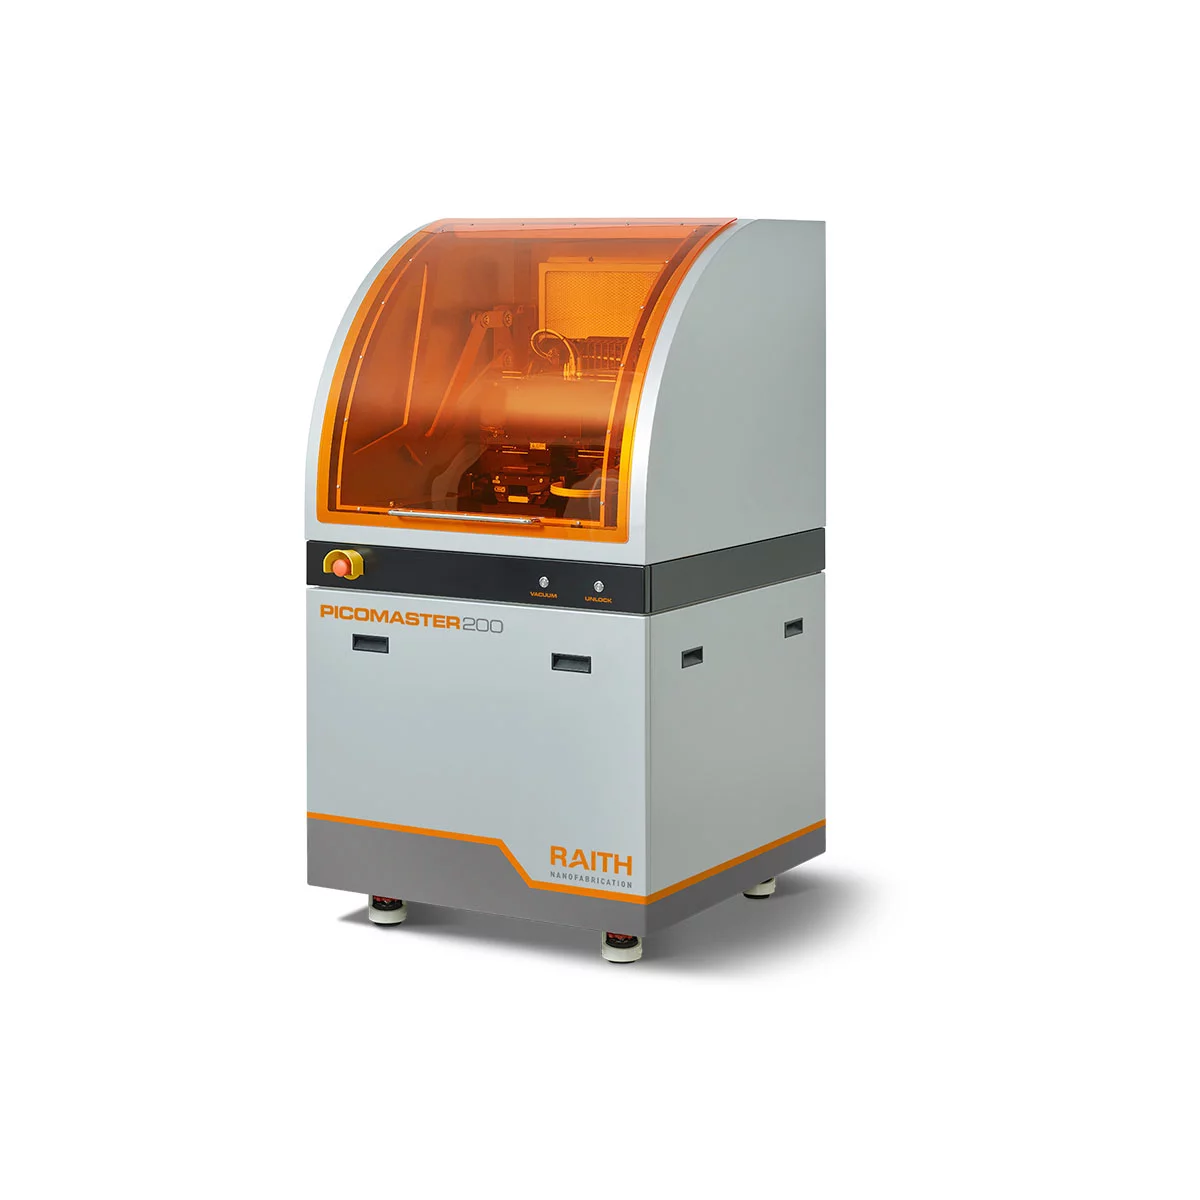 Picture of the laser lithography system PICOMASTER